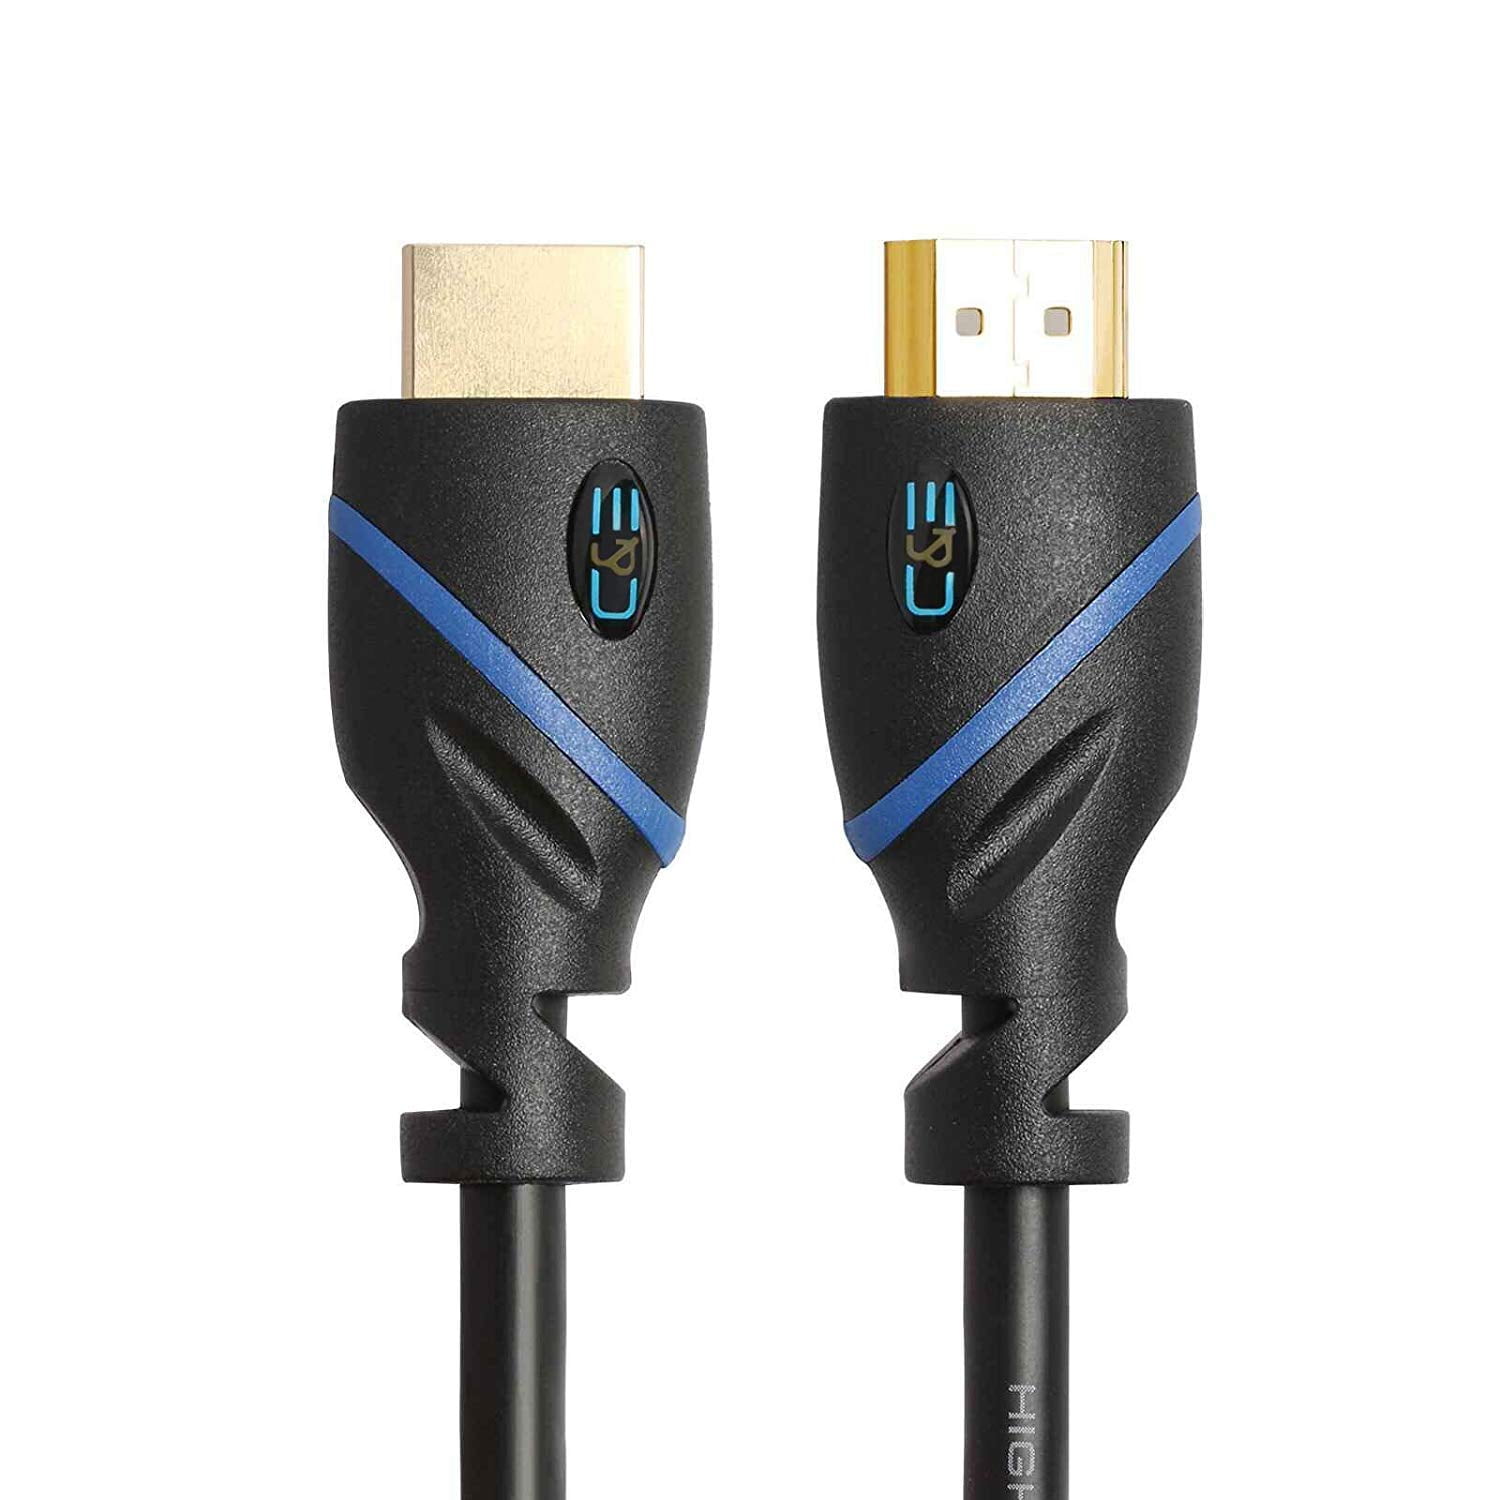 Ethernet and Audio Return High Speed HDMI Cable 50 Ft 50 Feet 4K Ready 26 AWG CL3 Rated for In-wall Installation Supports 3D Aurum Ultra Series 